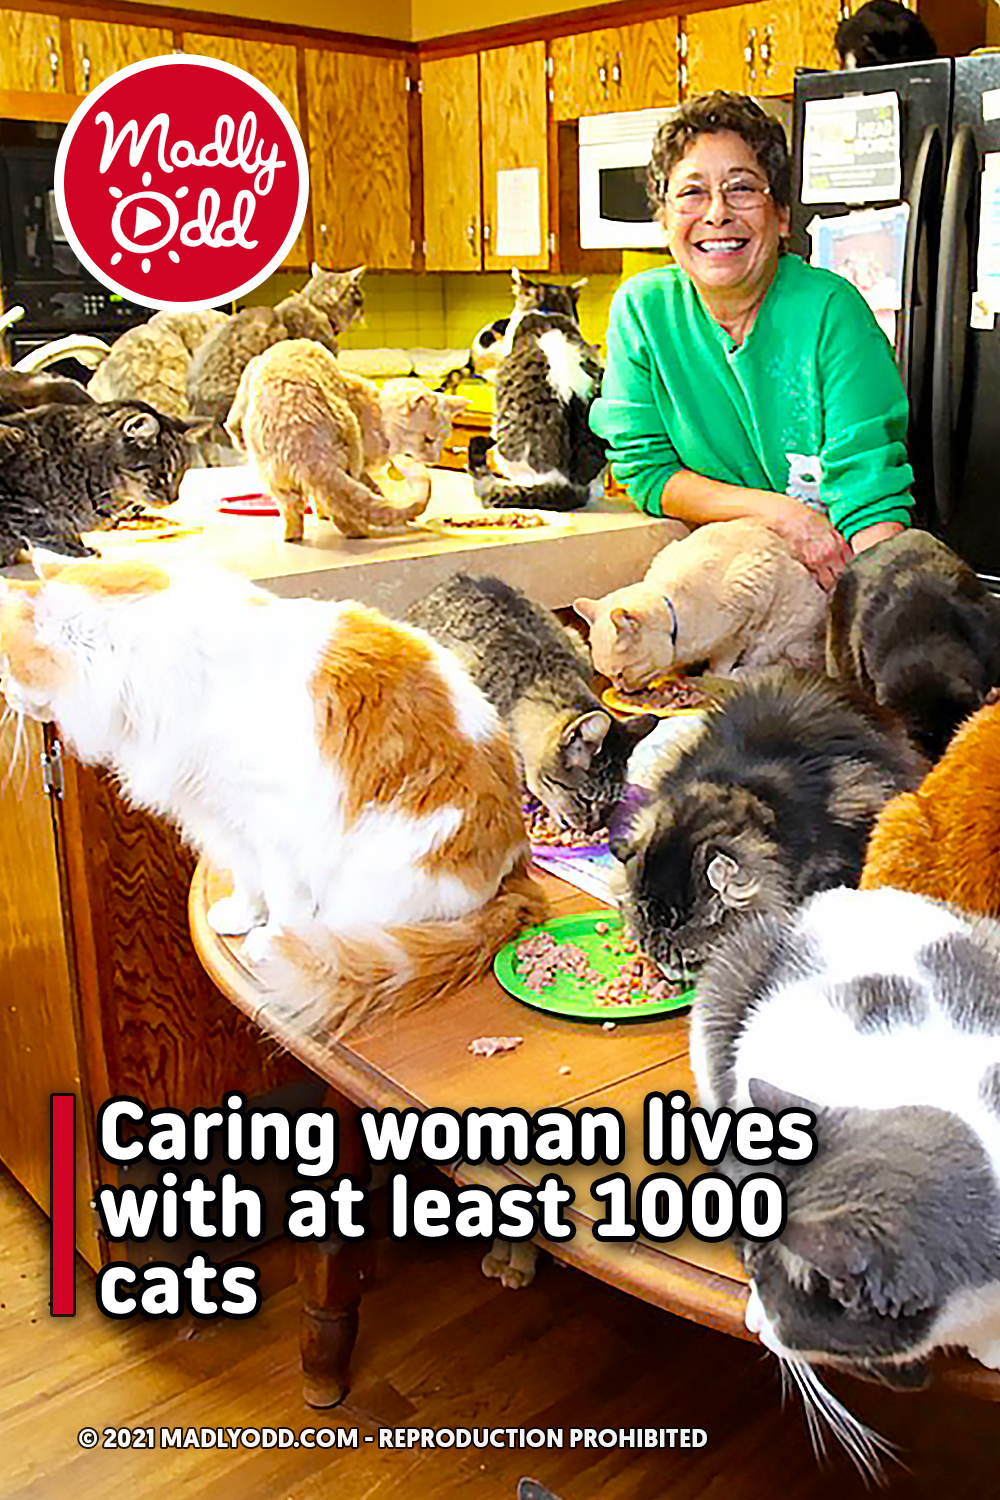 Caring woman lives with at least 1000 cats